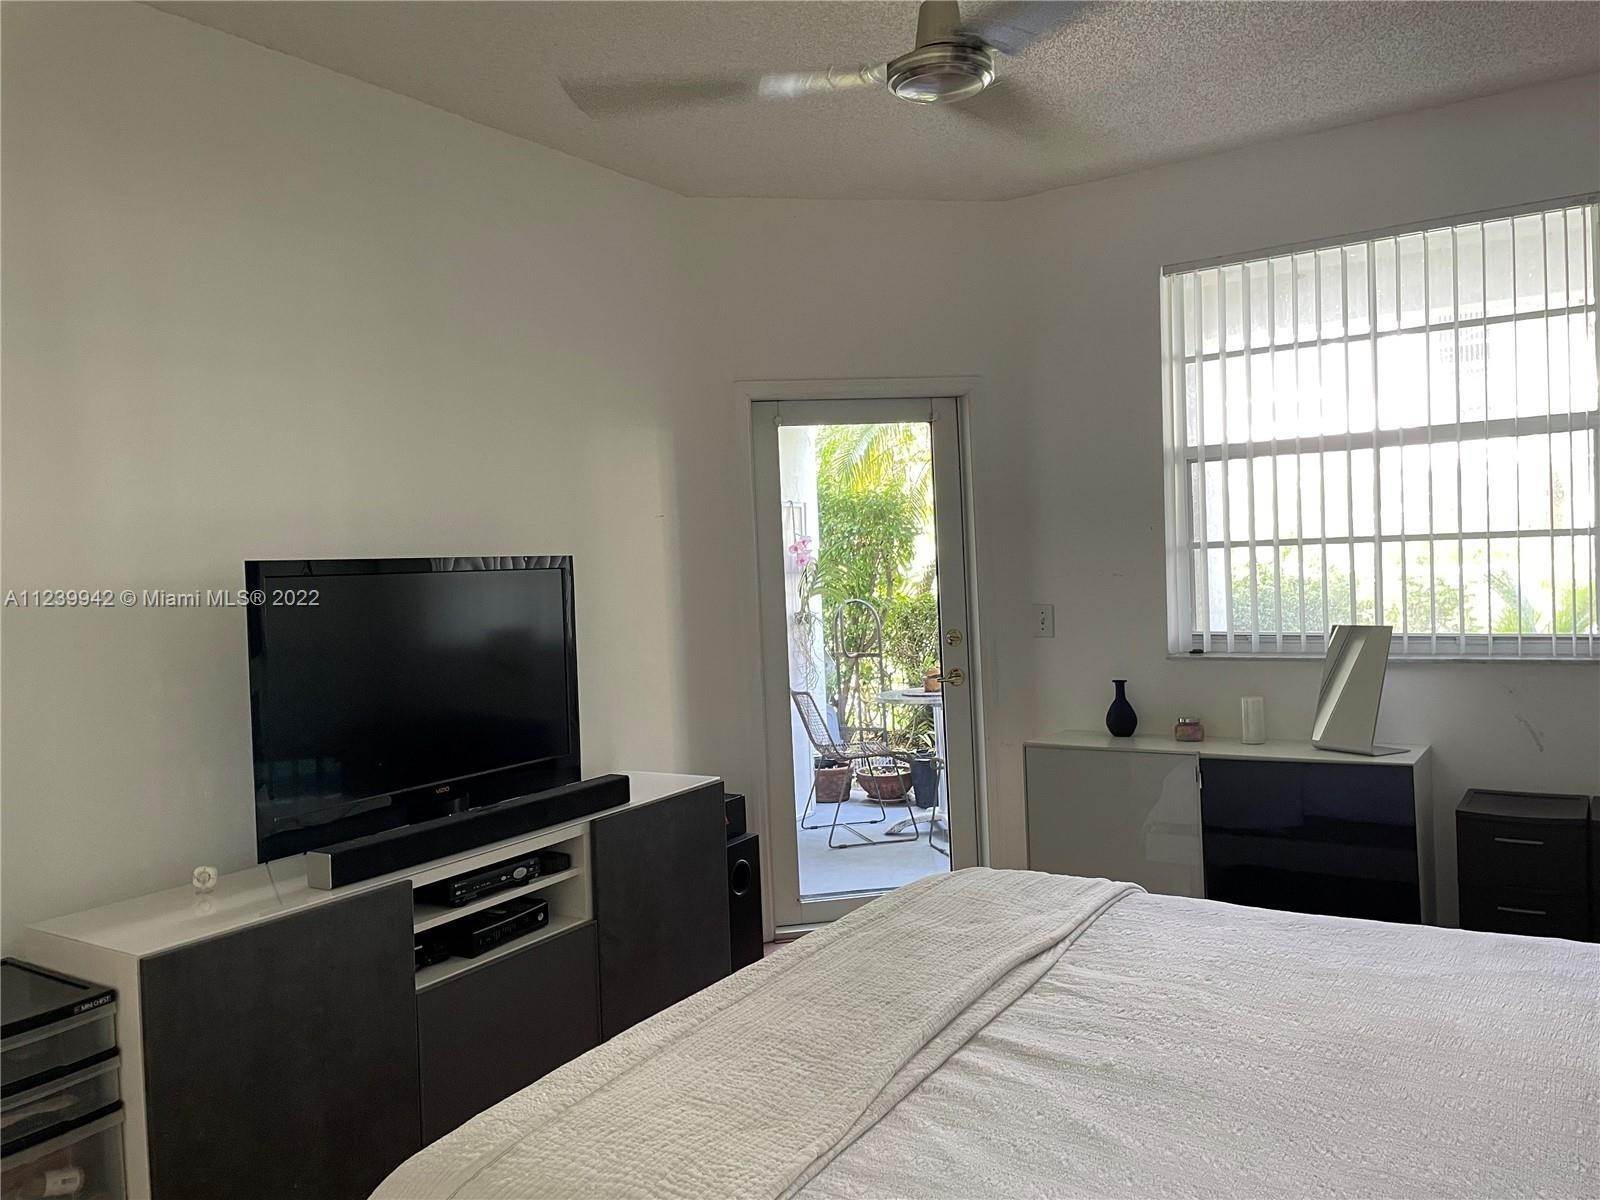 15. Townhouse for Sale at Aventura, FL 33160